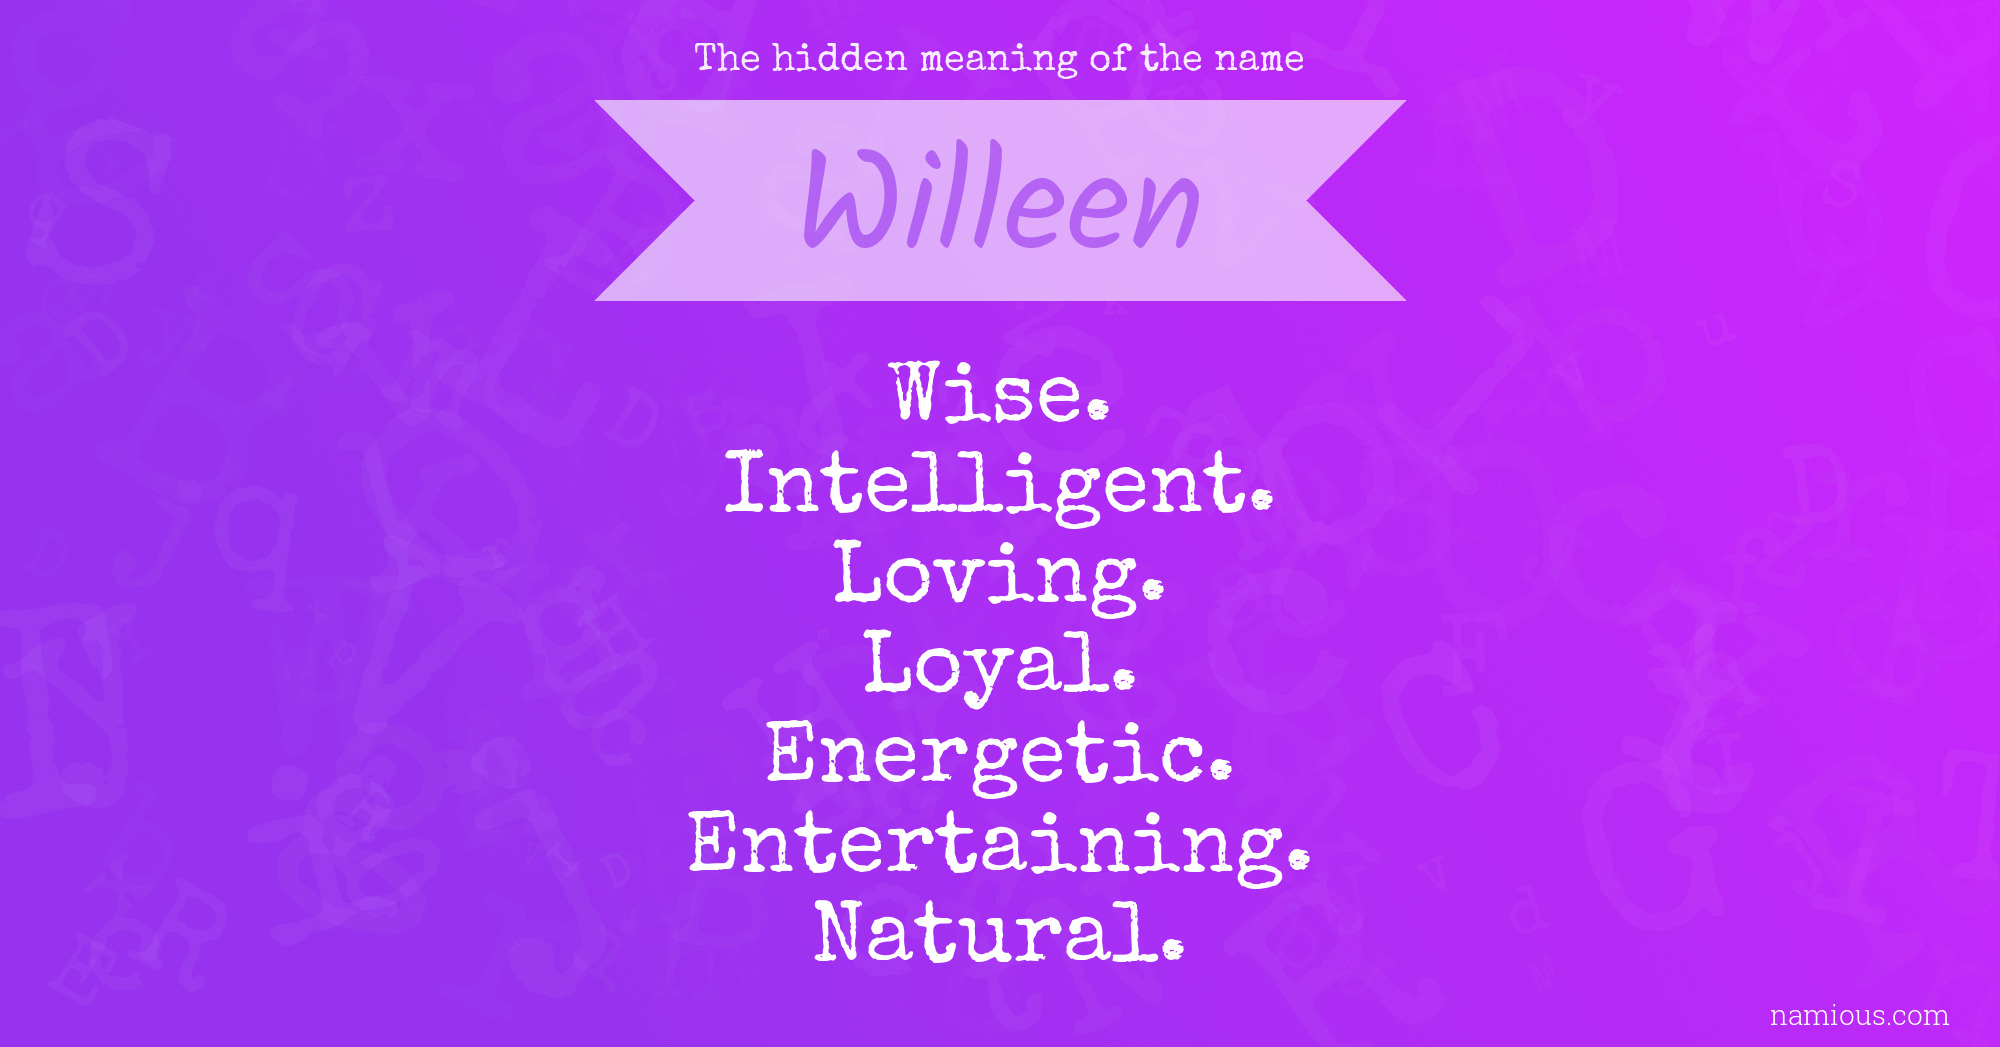 The hidden meaning of the name Willeen